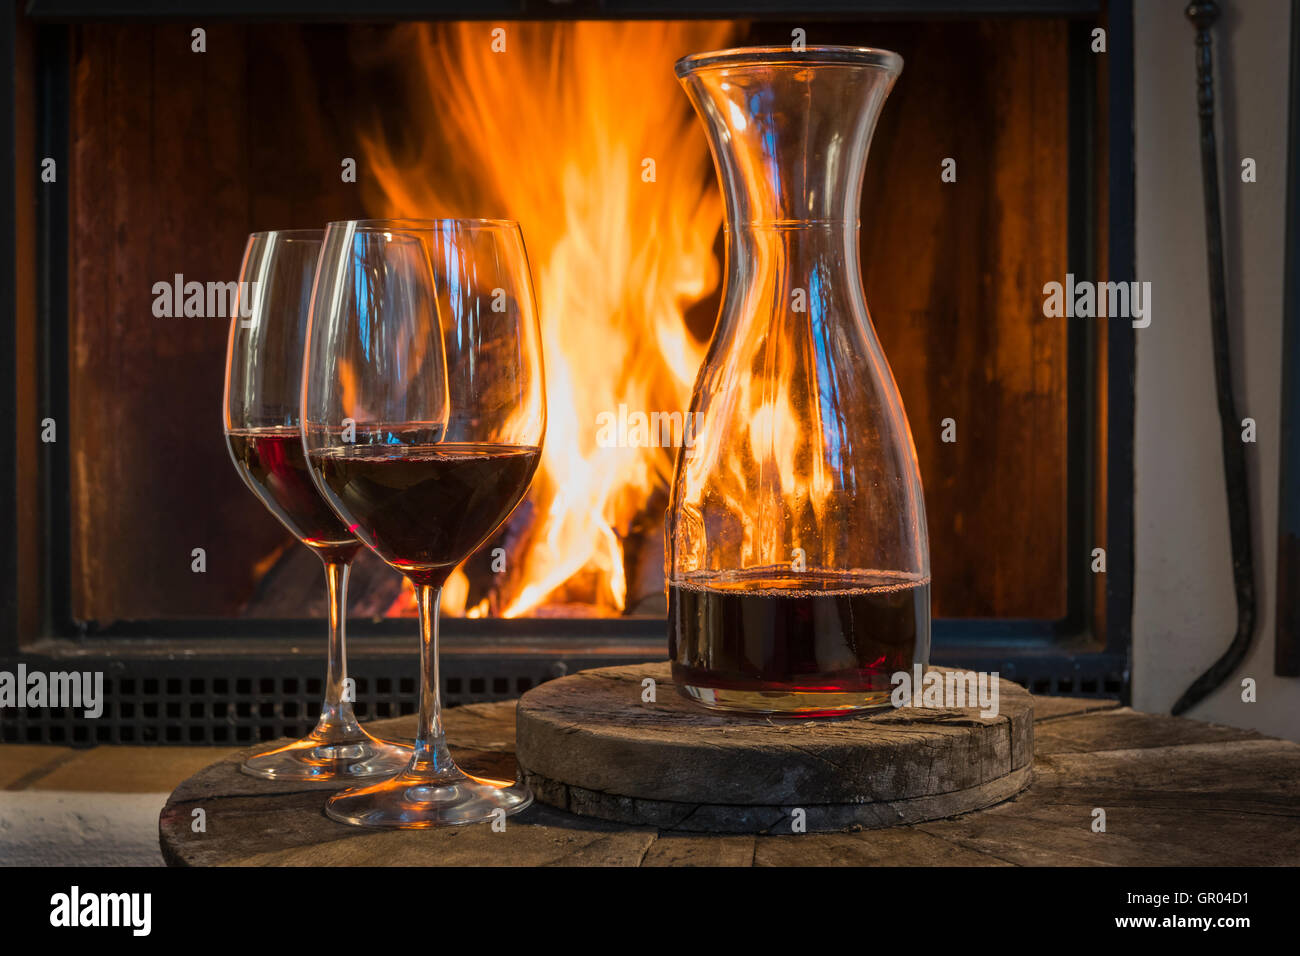 relaxing at fireplace in fall autumn winter with wine Stock Photo